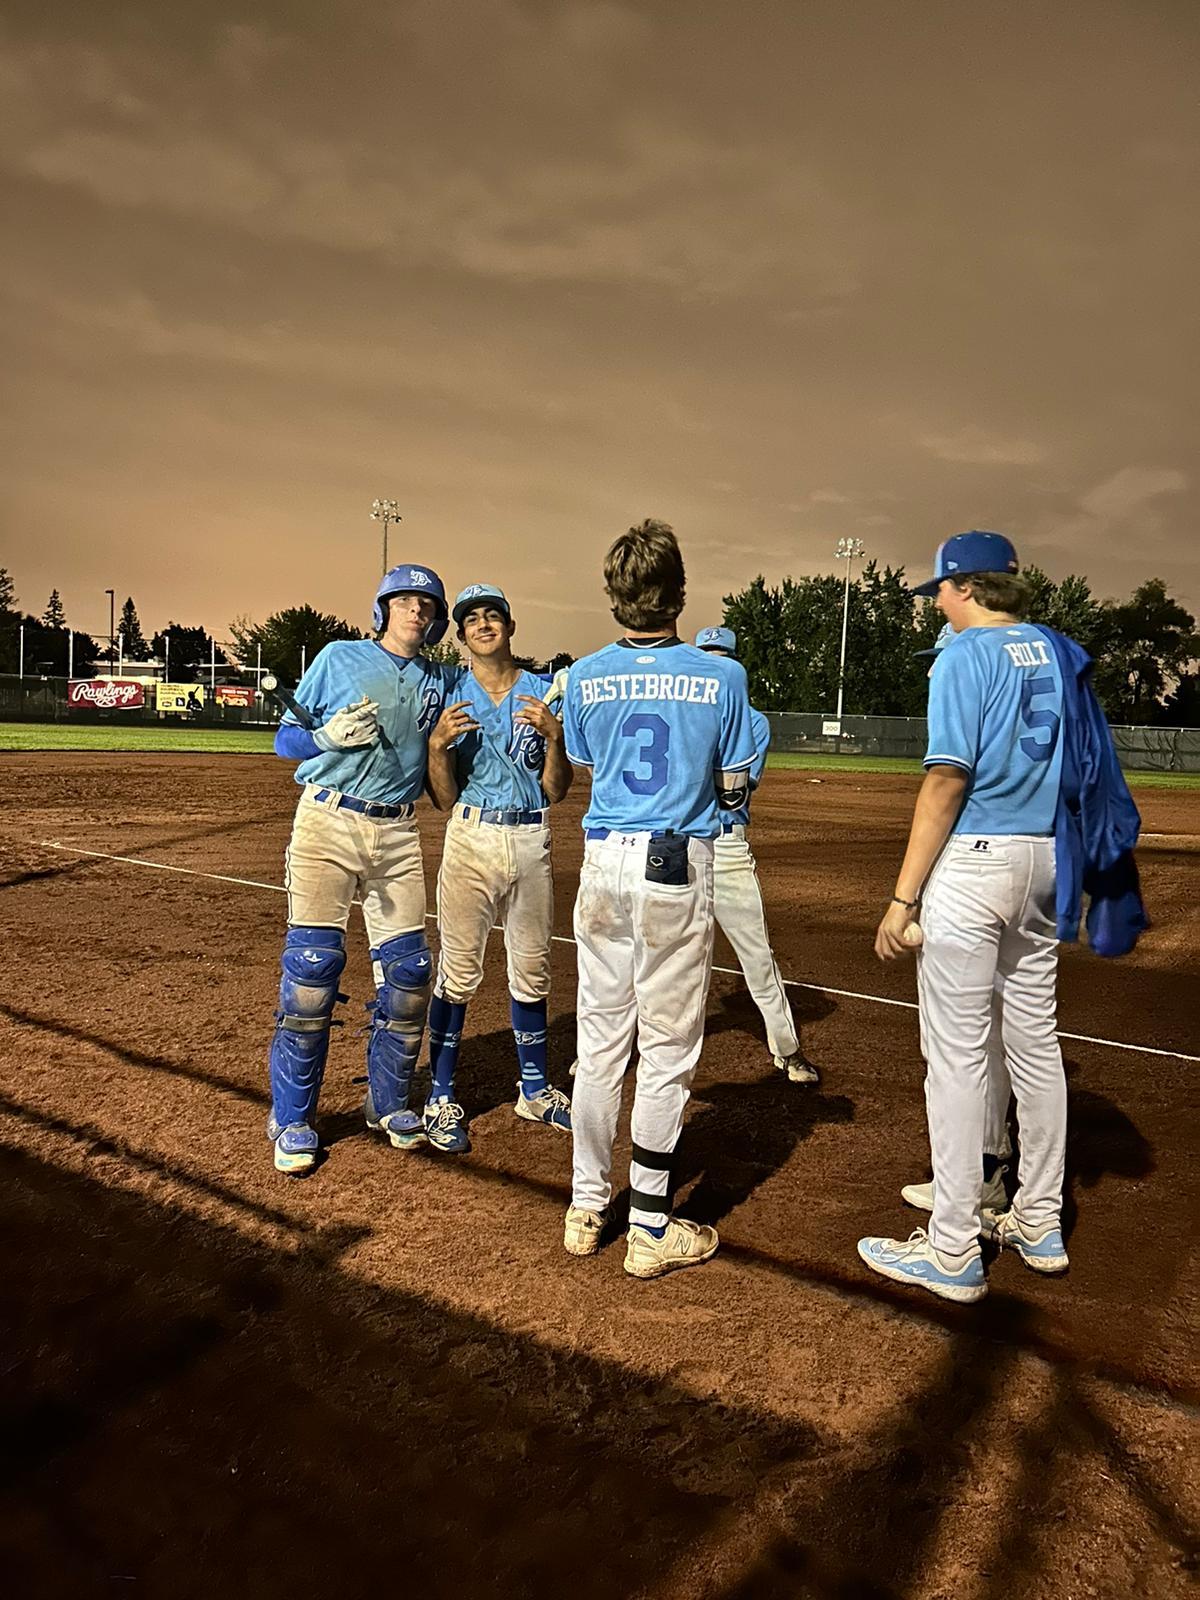 15U Nationals Game #2 - Team BC victorious as the clock strikes midnight for Team Quebec